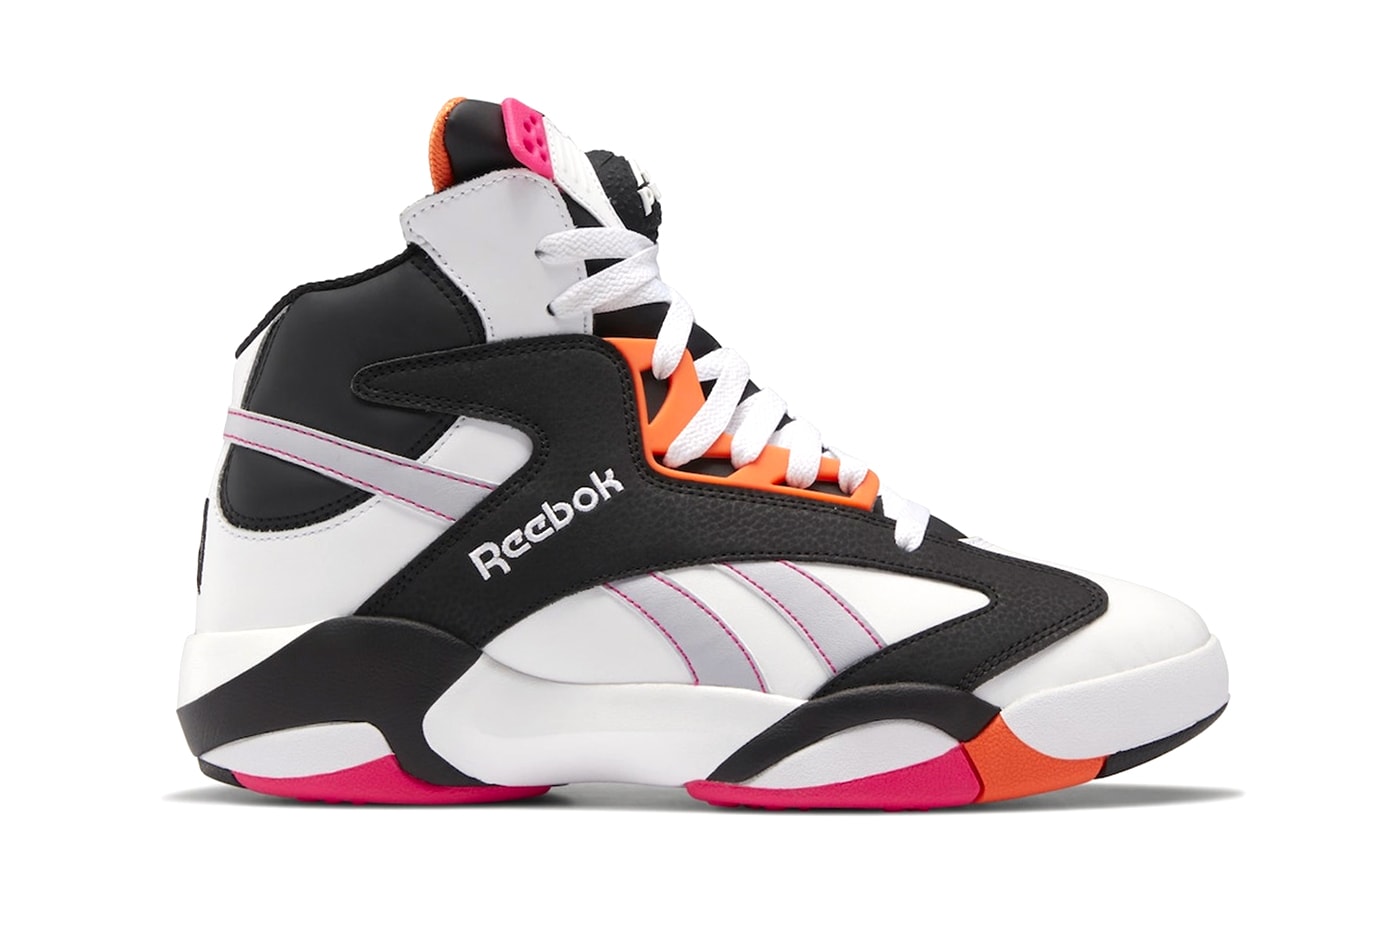 Reebok Shaq Attaq "Miami" Colorway Has an Official Release Date HR0500 Footwear White/Core Black-Cold Grey shaquille oneile basketball shoes miami grand prix 